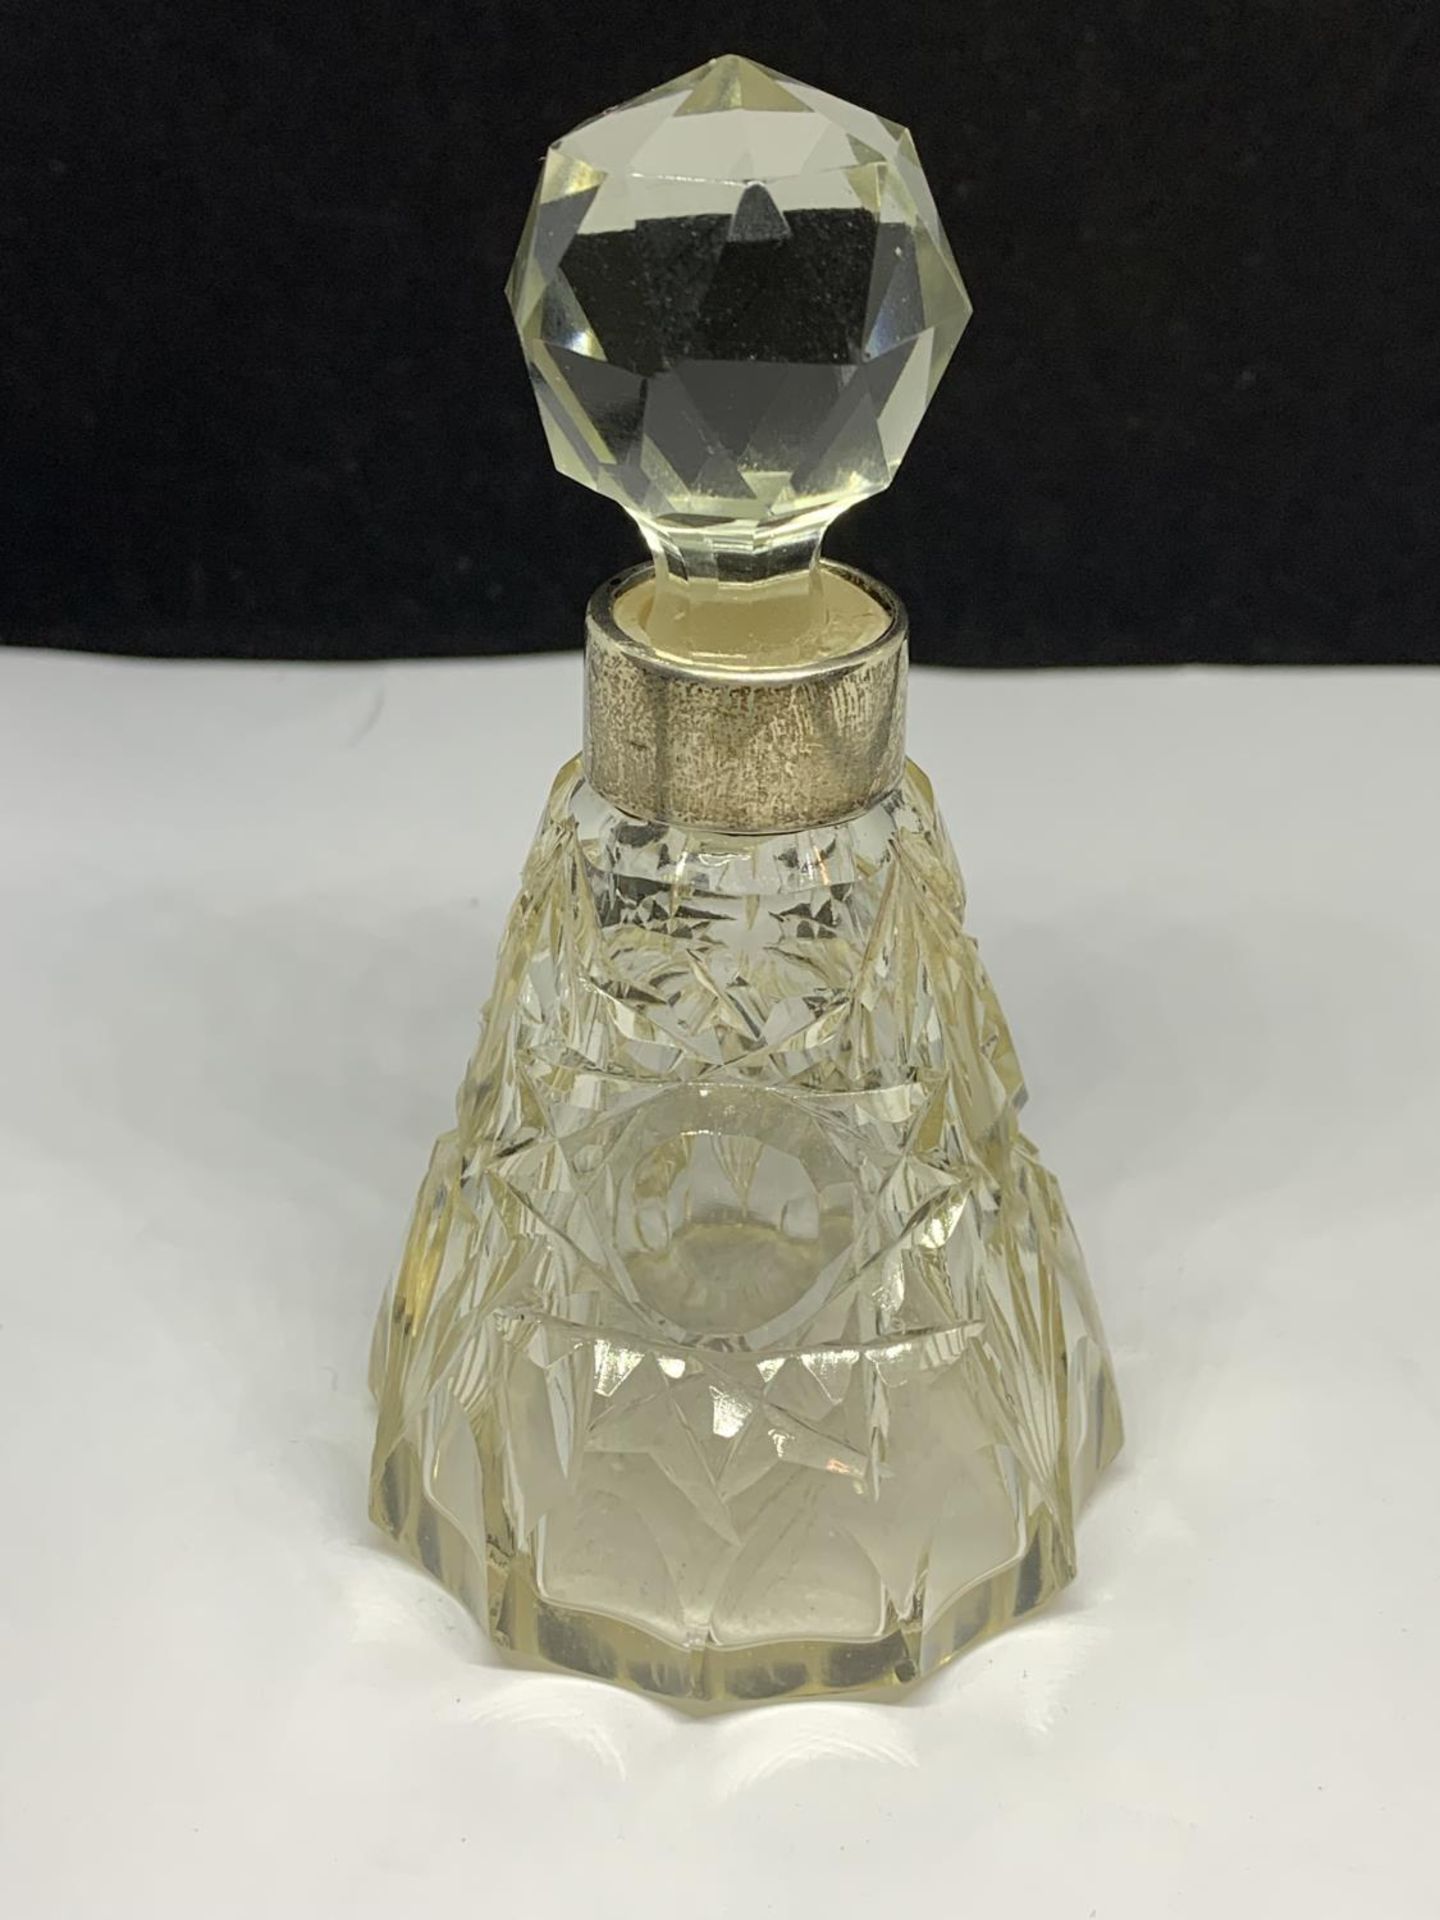 A CUT GLASS PERFUME BOTTLE WITH A HALLMARKED BIRMINGHAM 1931 SILVER COLLAR MAKER SML - Image 2 of 3